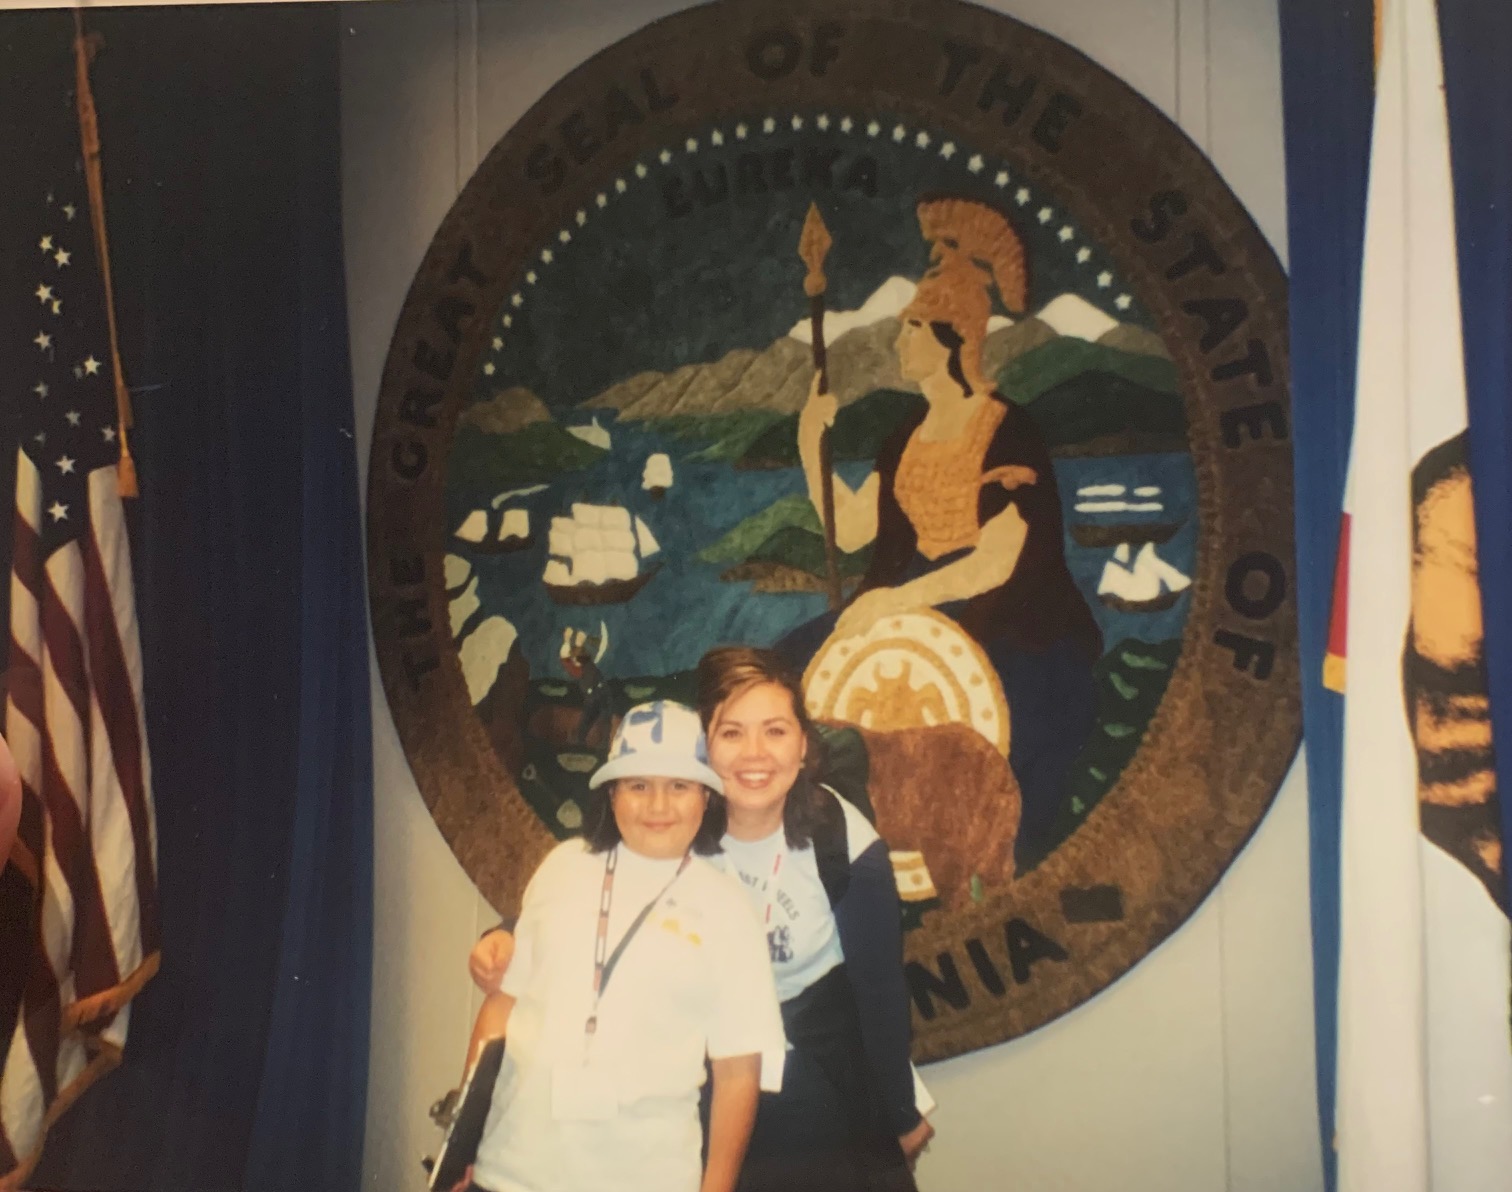 In the fourth grade, Jizell took a class field trip with her mother, Manuella, to the state capitol in Sacramento. She couldn't have imagined that one day she would have an office only blocks away from the capitol building.